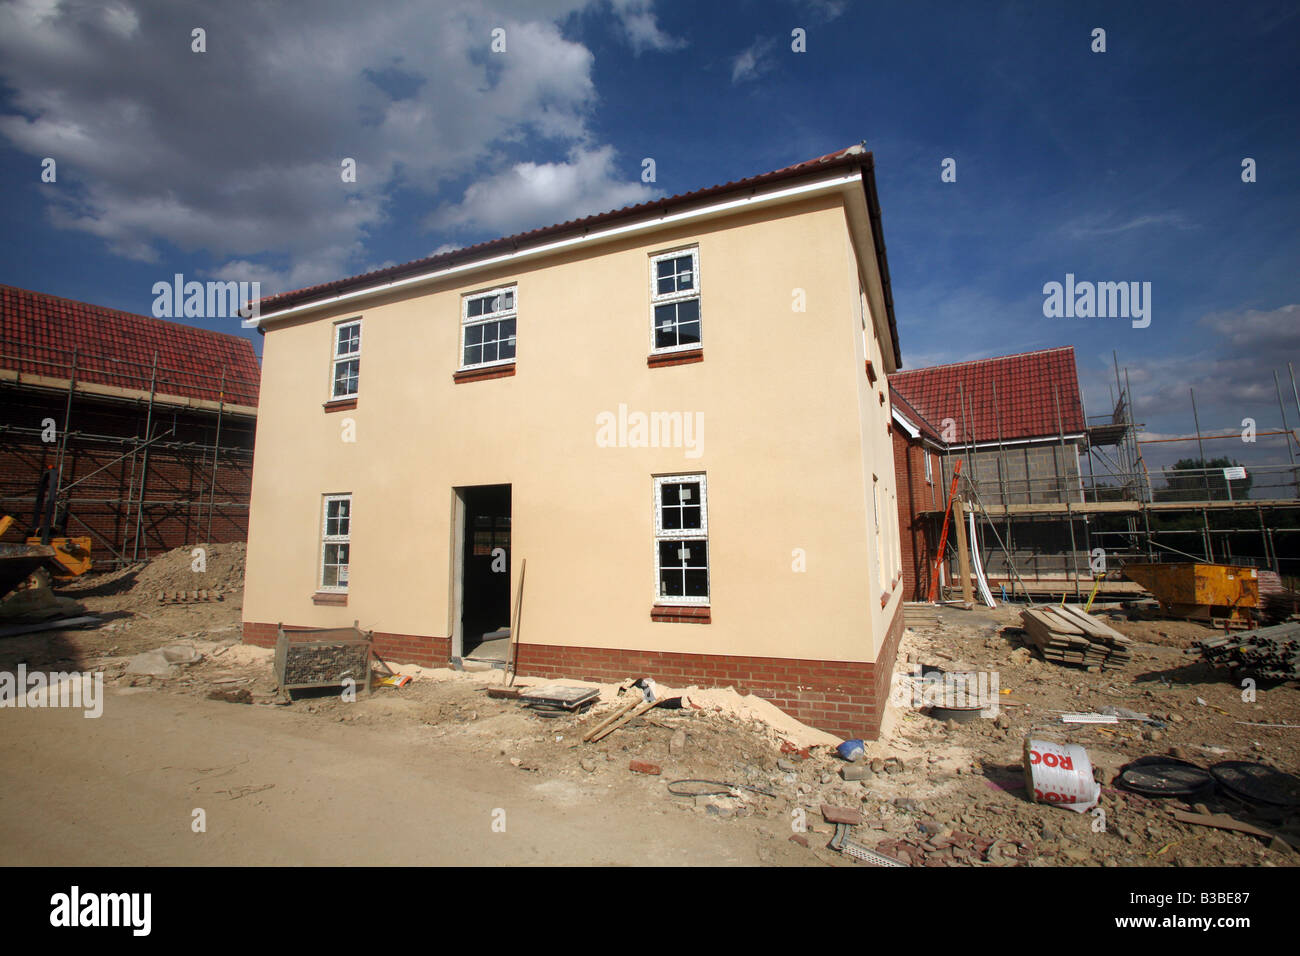 PICTURE SHOWS HOMES BEING BUILT ON FORMER AGRICULTURAL LAND IN HAVERHILL SUFFOLK Stock Photo